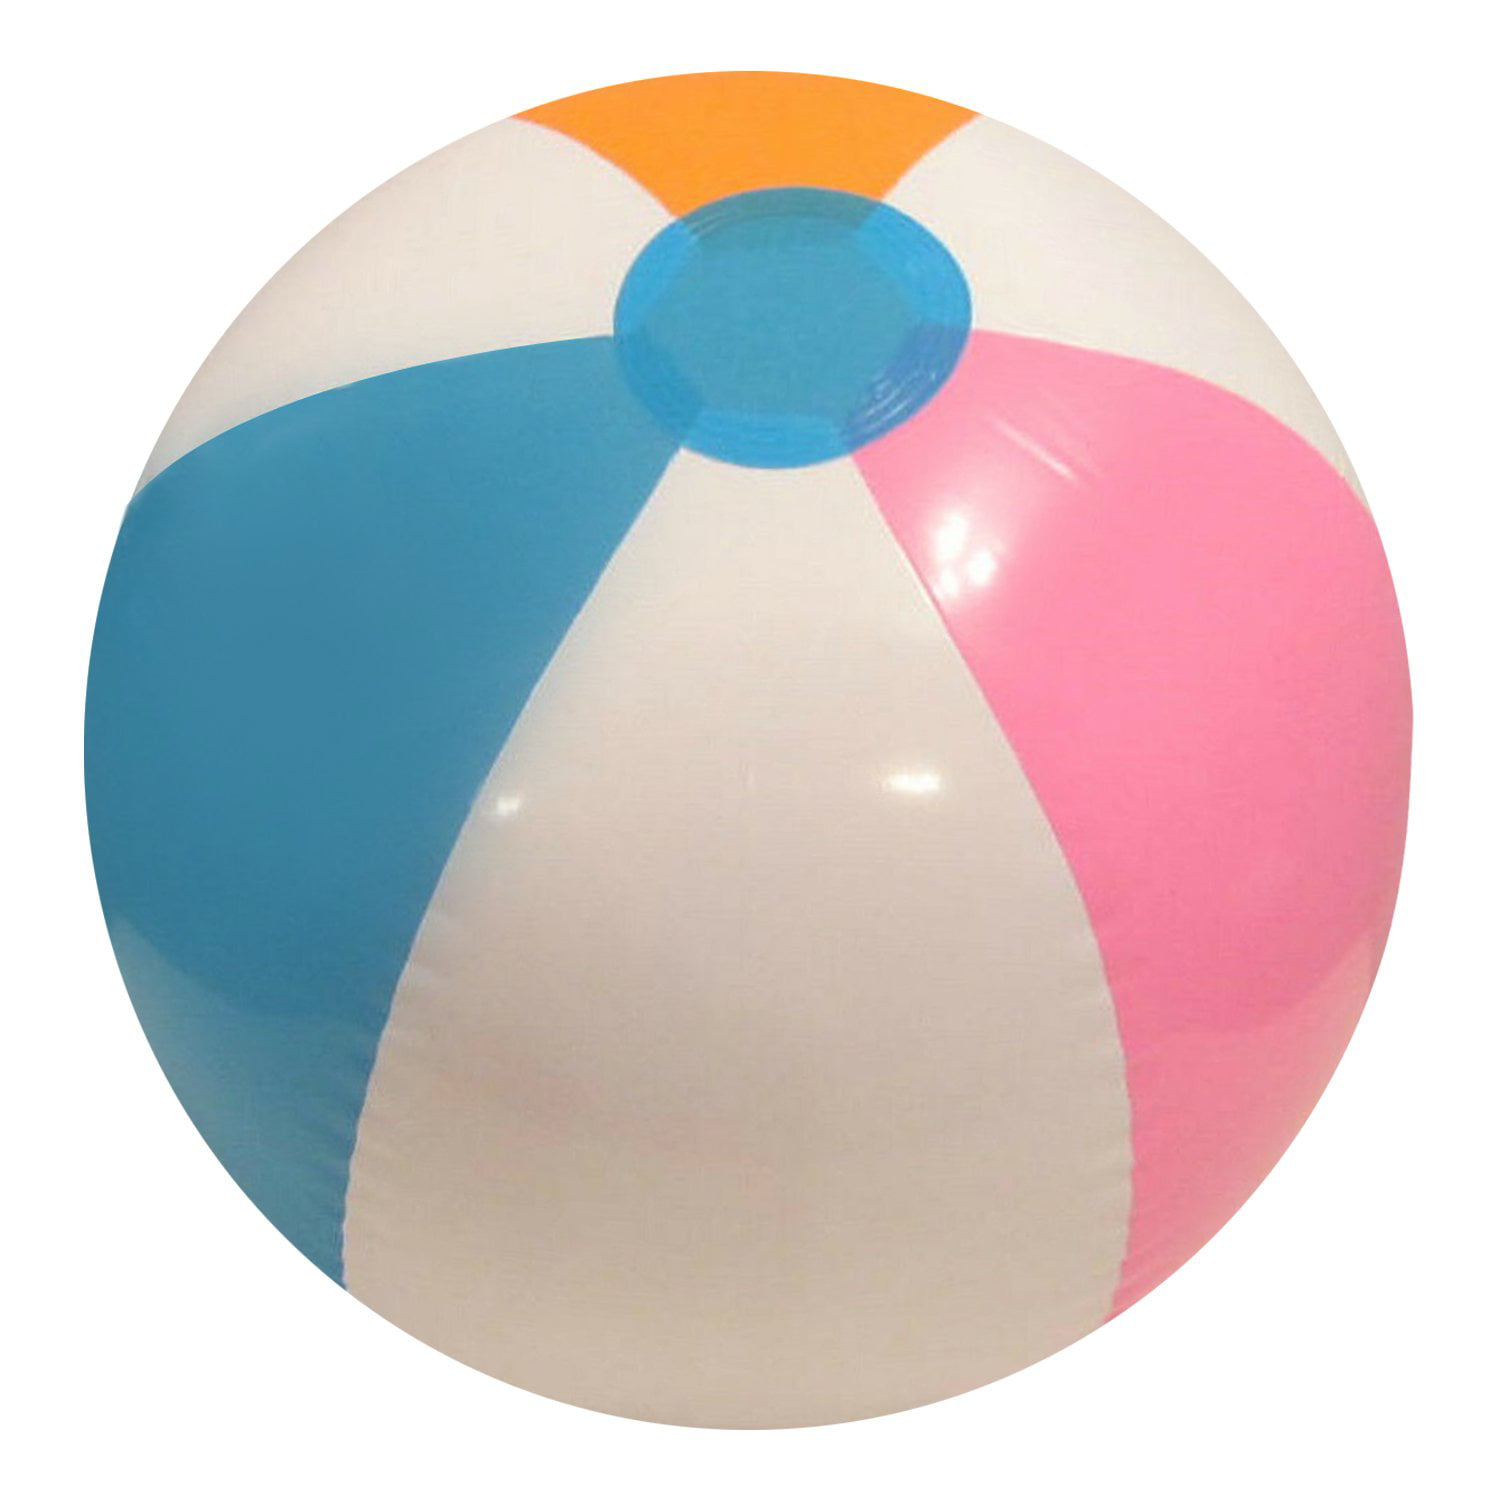 BLOW UP BEACH BALL INFLATABLE 20" 24" HOLIDAY PARTY HOLIDAY SWIMMING PANEL SEA 